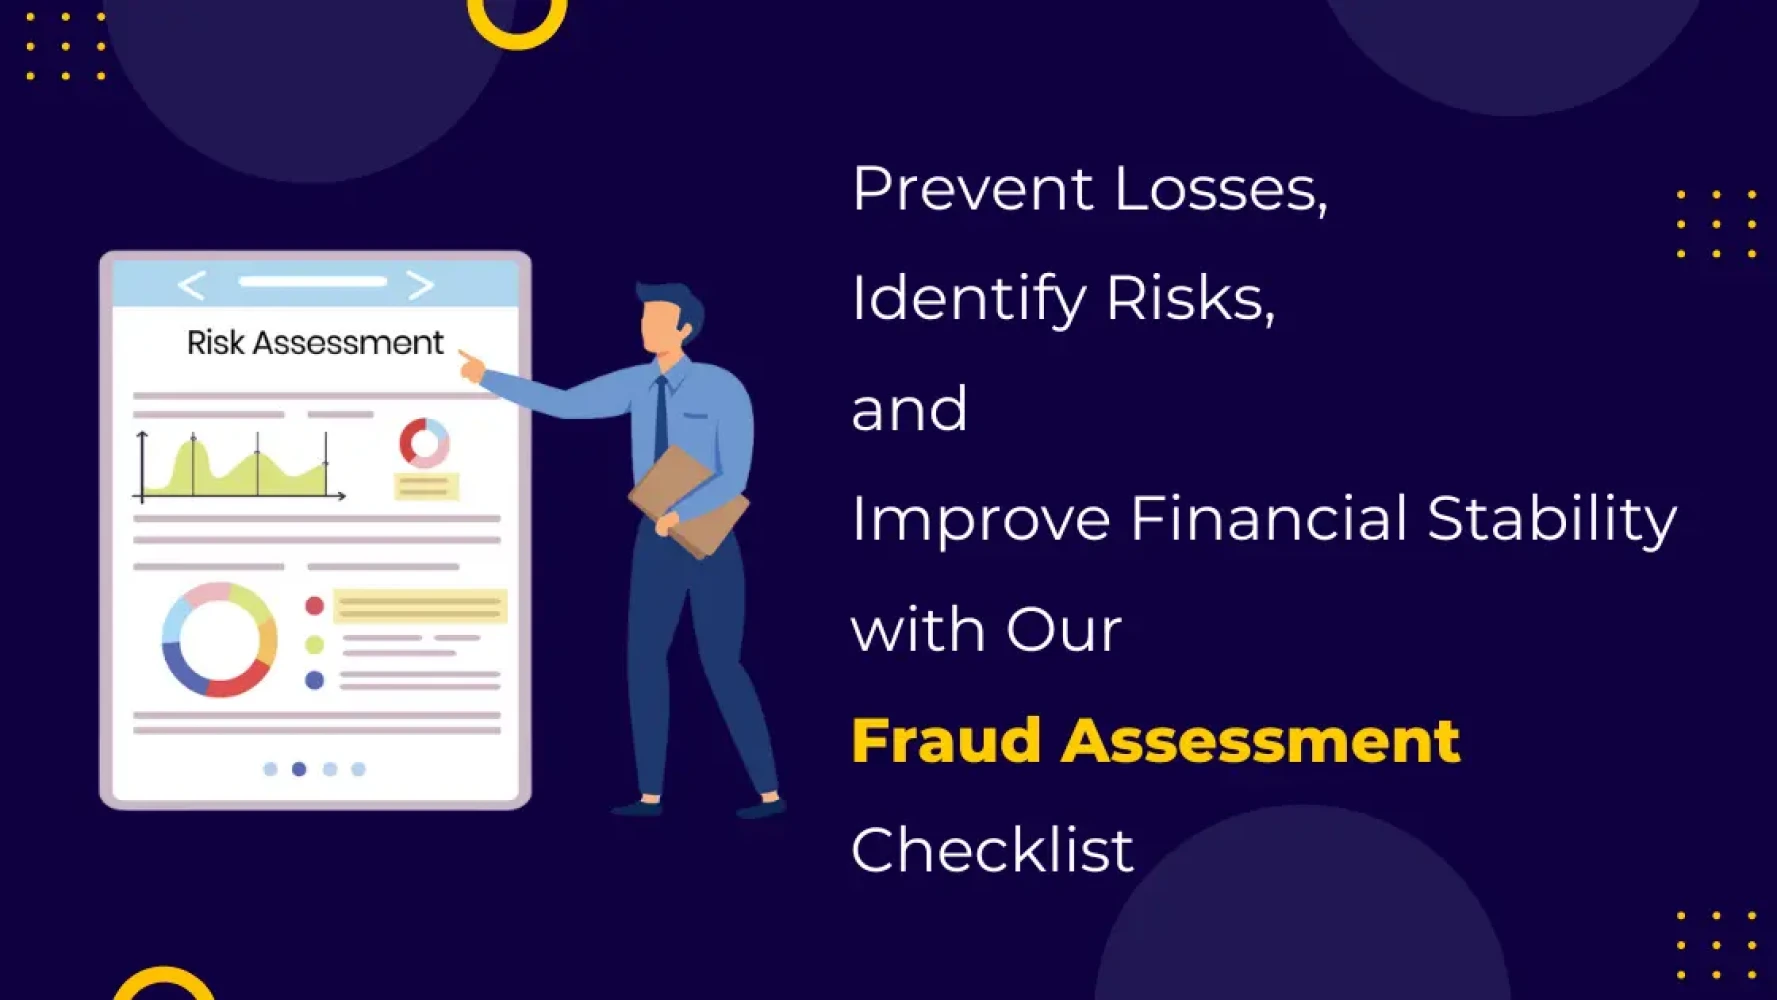 Prevent Losses, Identify Risks, and  Improve Financial Stability with Our Fraud Assessment Checklist